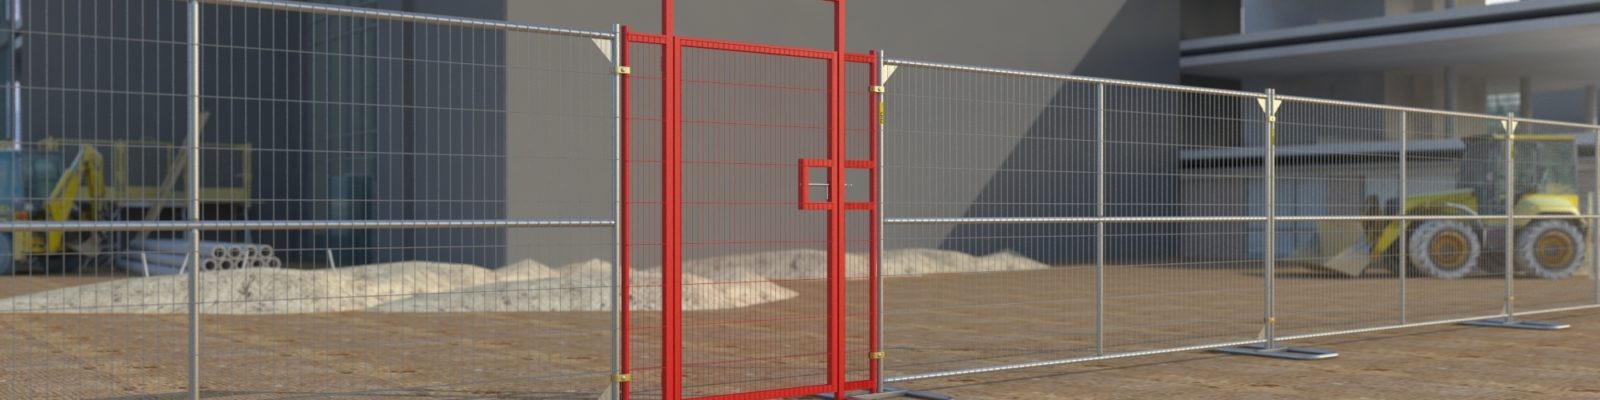 temporary fencing at construction site with pedestrian gate